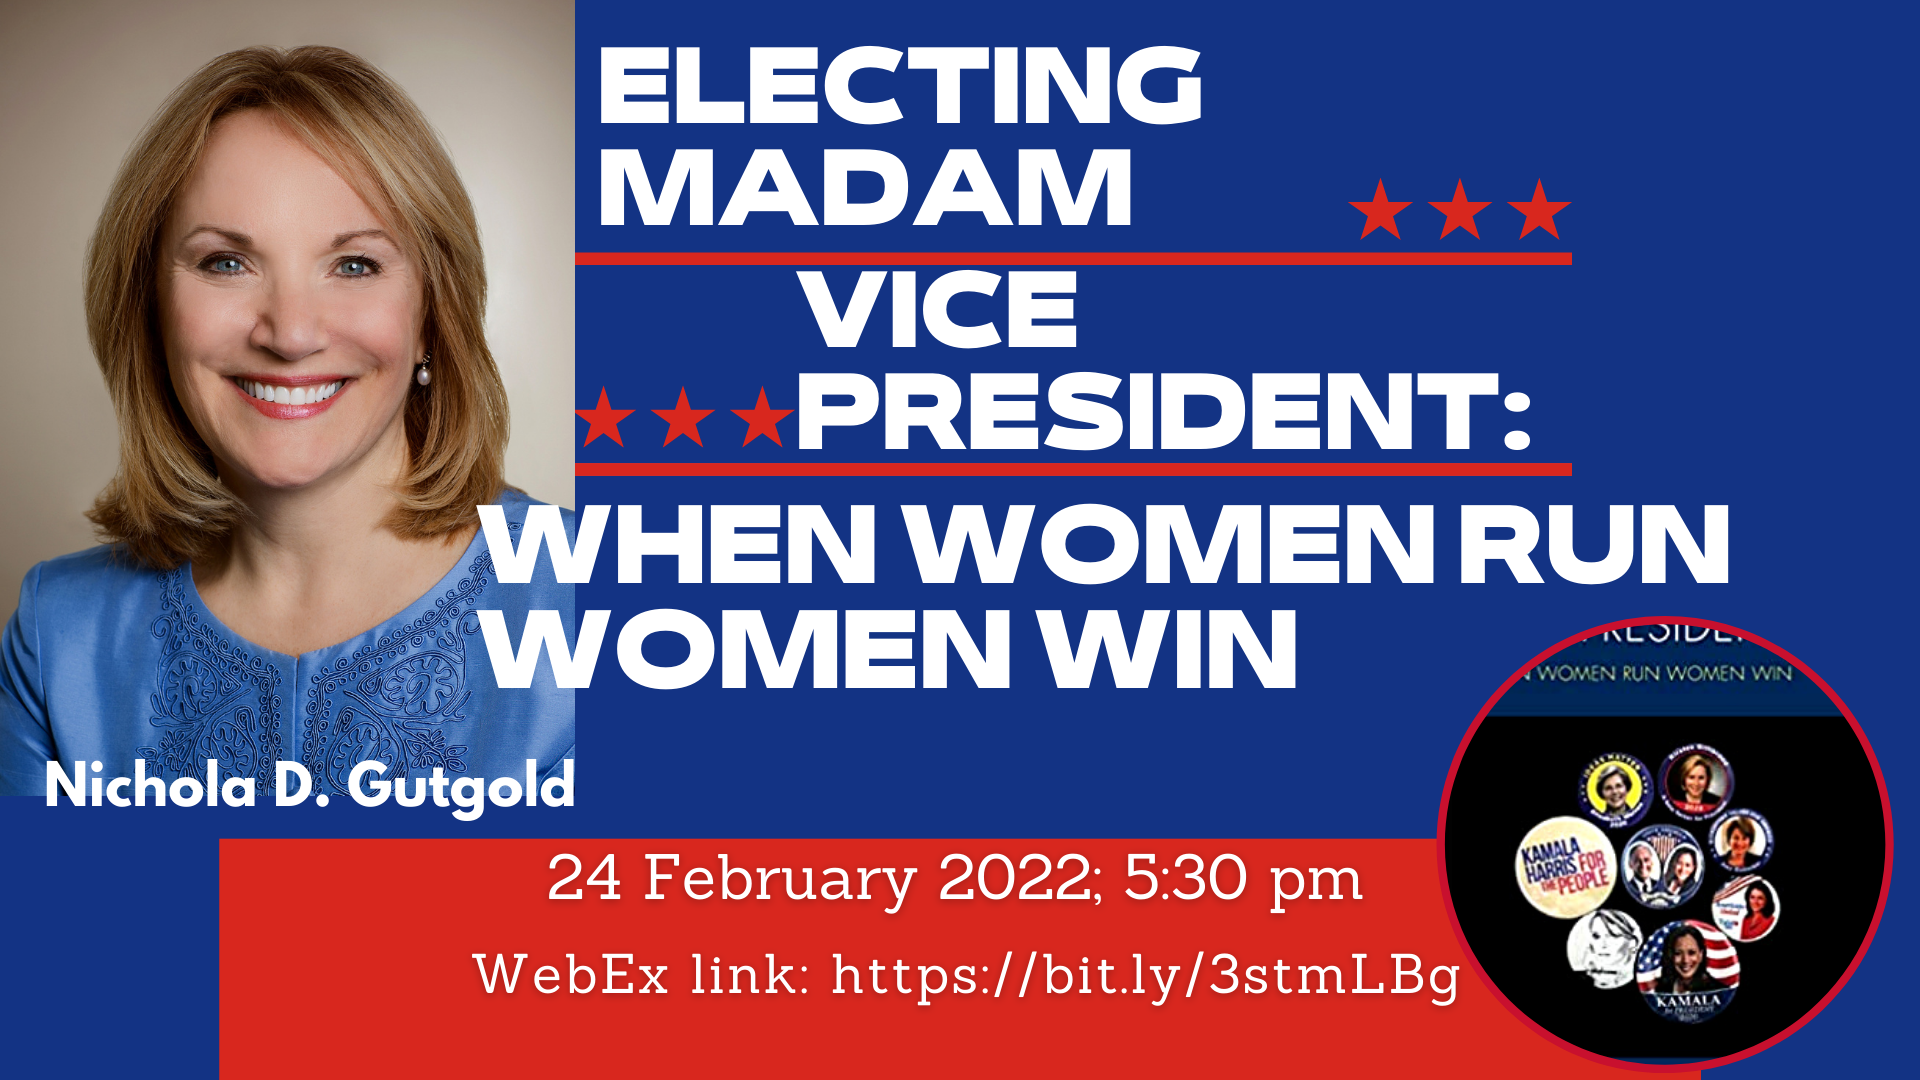 electing-madam-vice-president-when-women-run-women-win-events-in-the-college-of-liberal